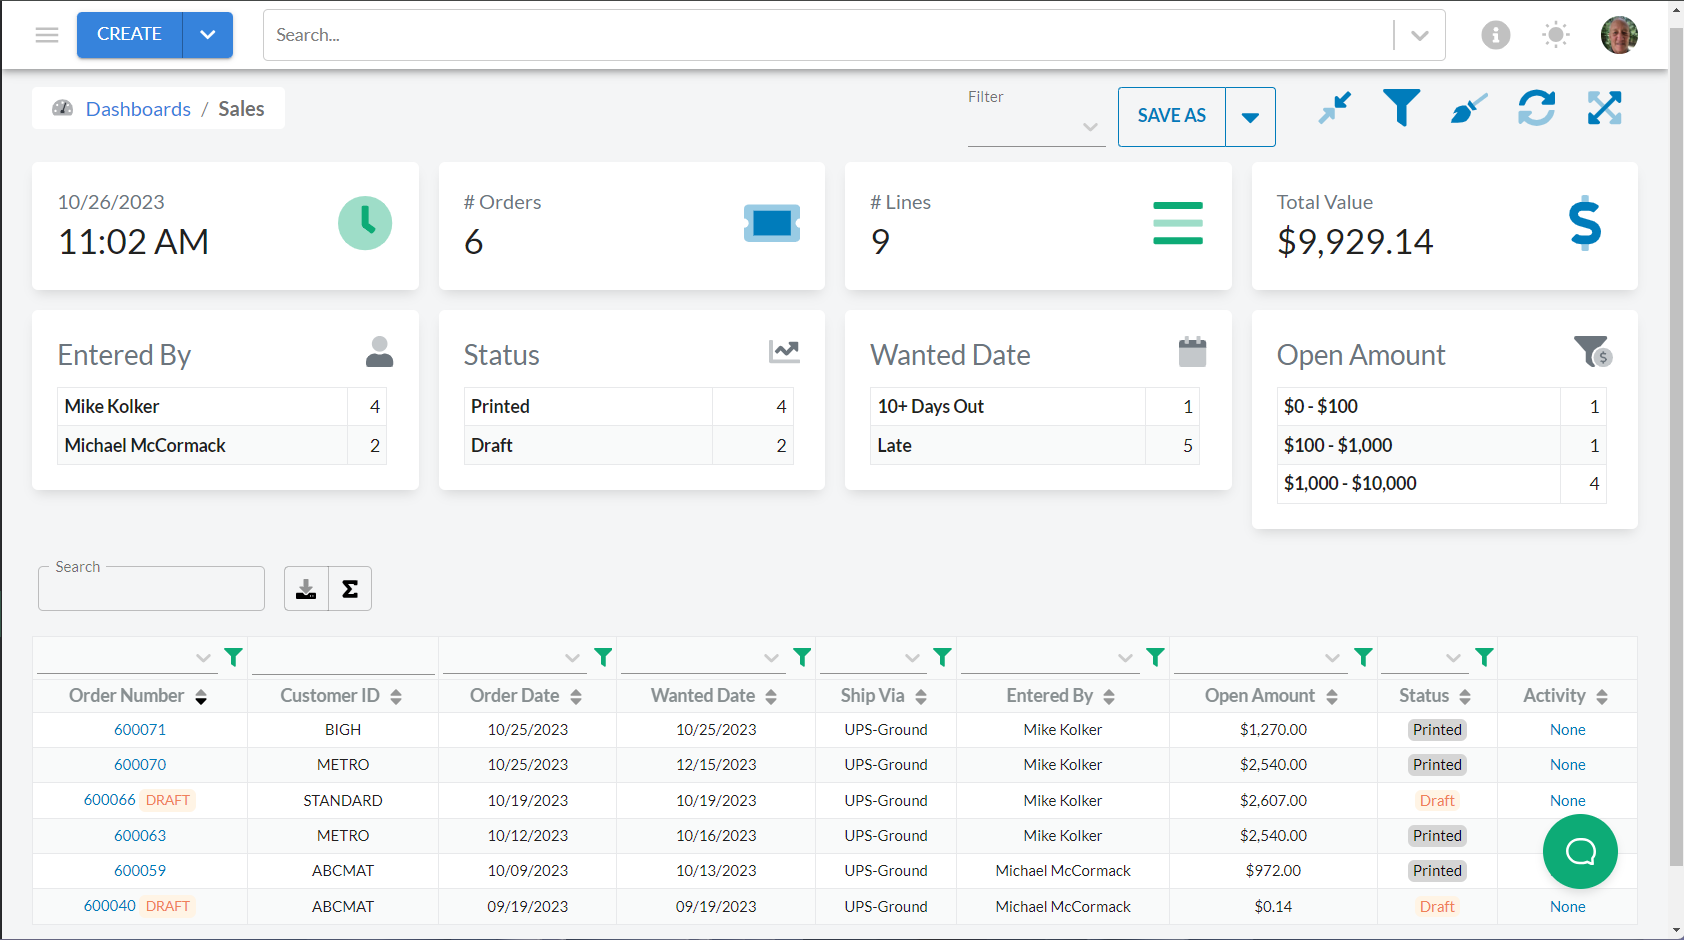 Sales Dashboard provides real-time status of orders in process